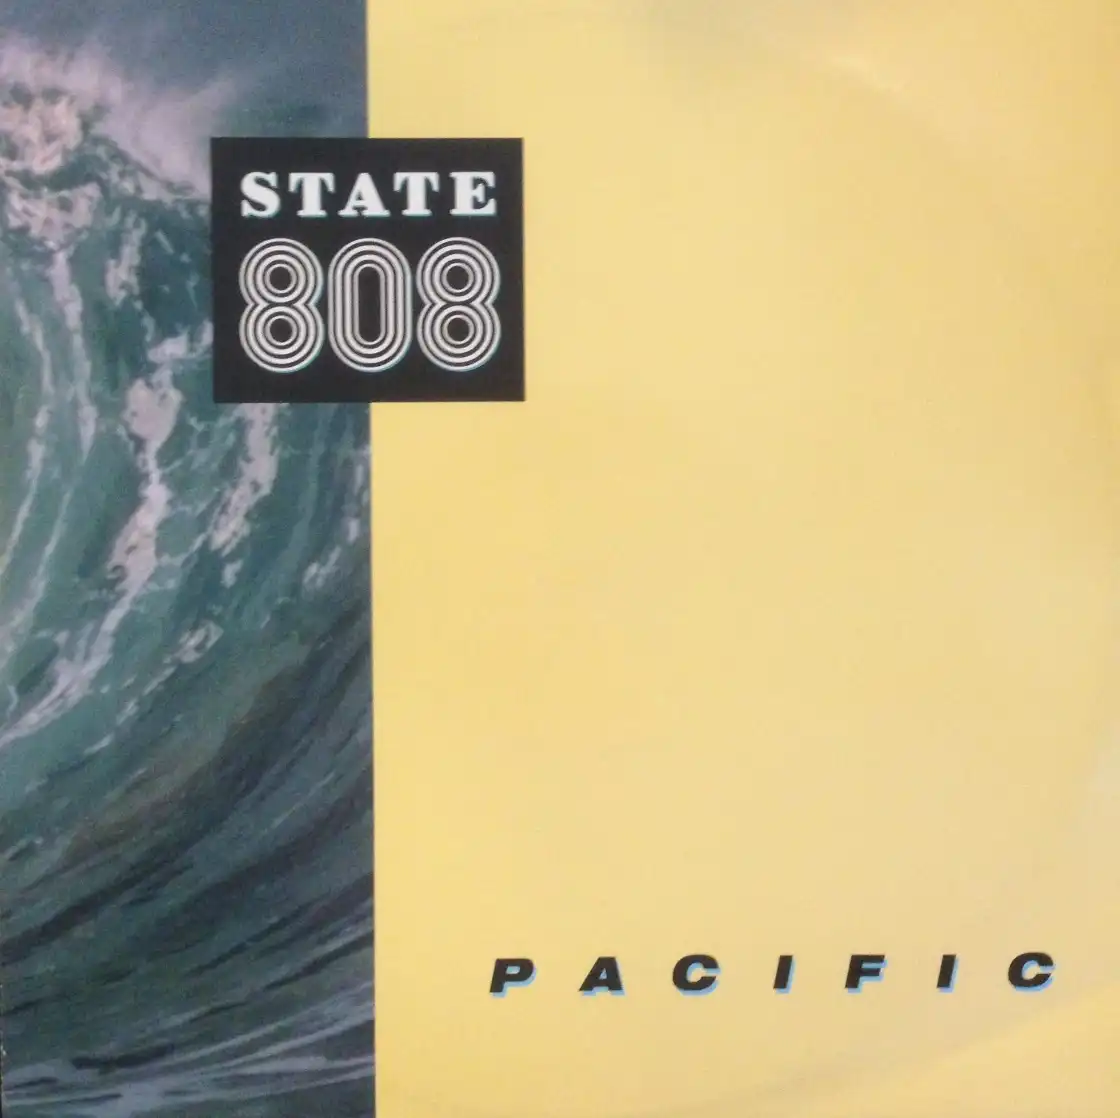 808 STATE / PACIFIC